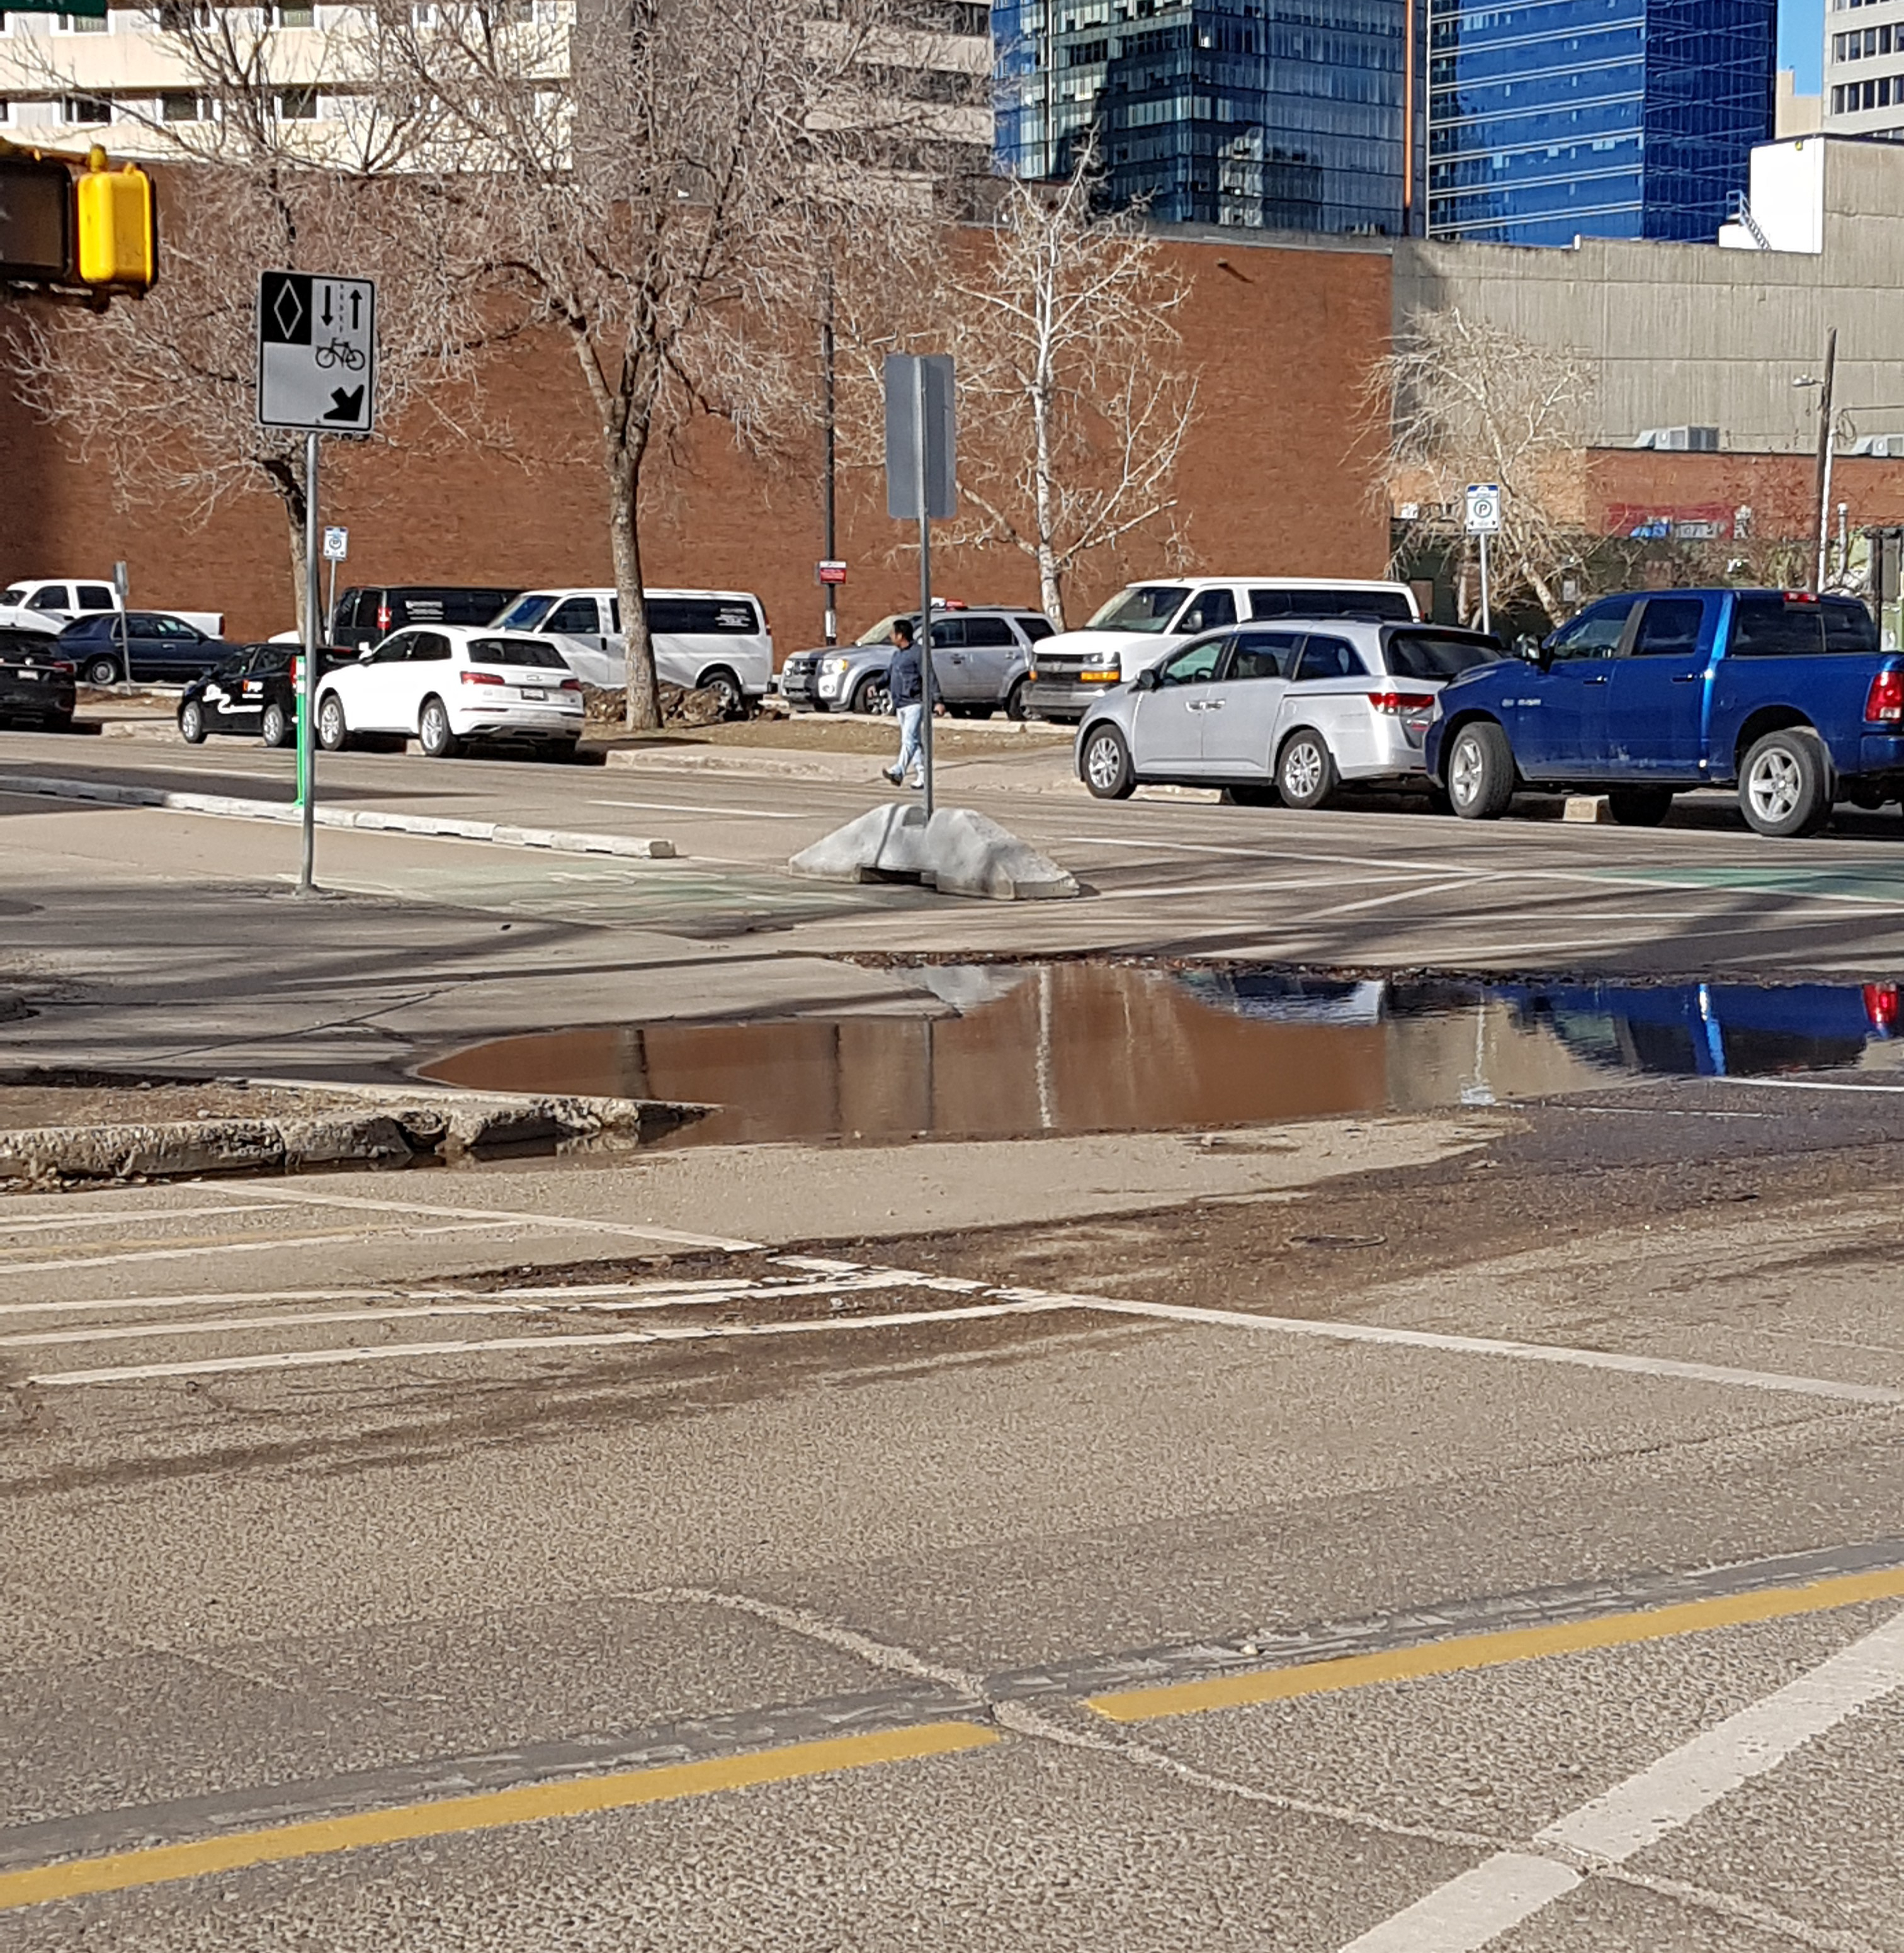 24 hours later, intersection is still flooded